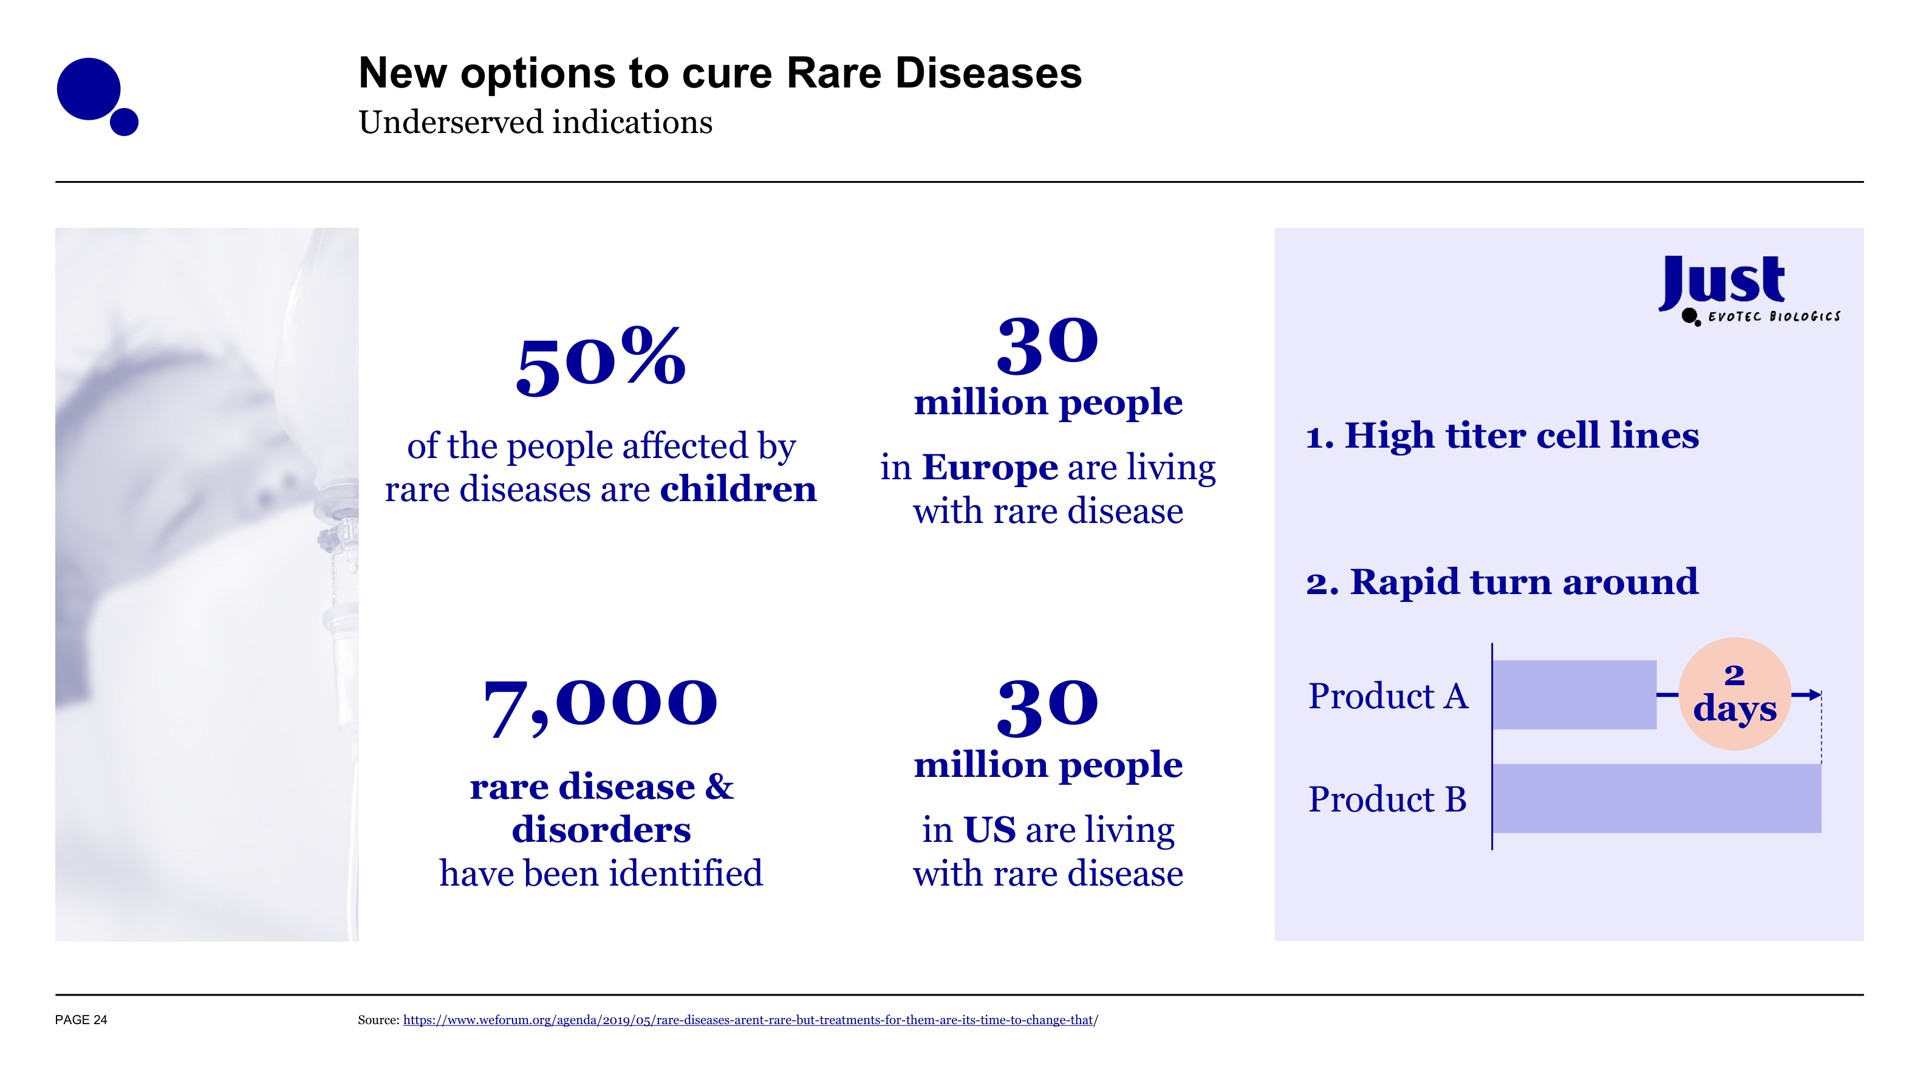 new options to cure rare diseases just product a days | Evotec